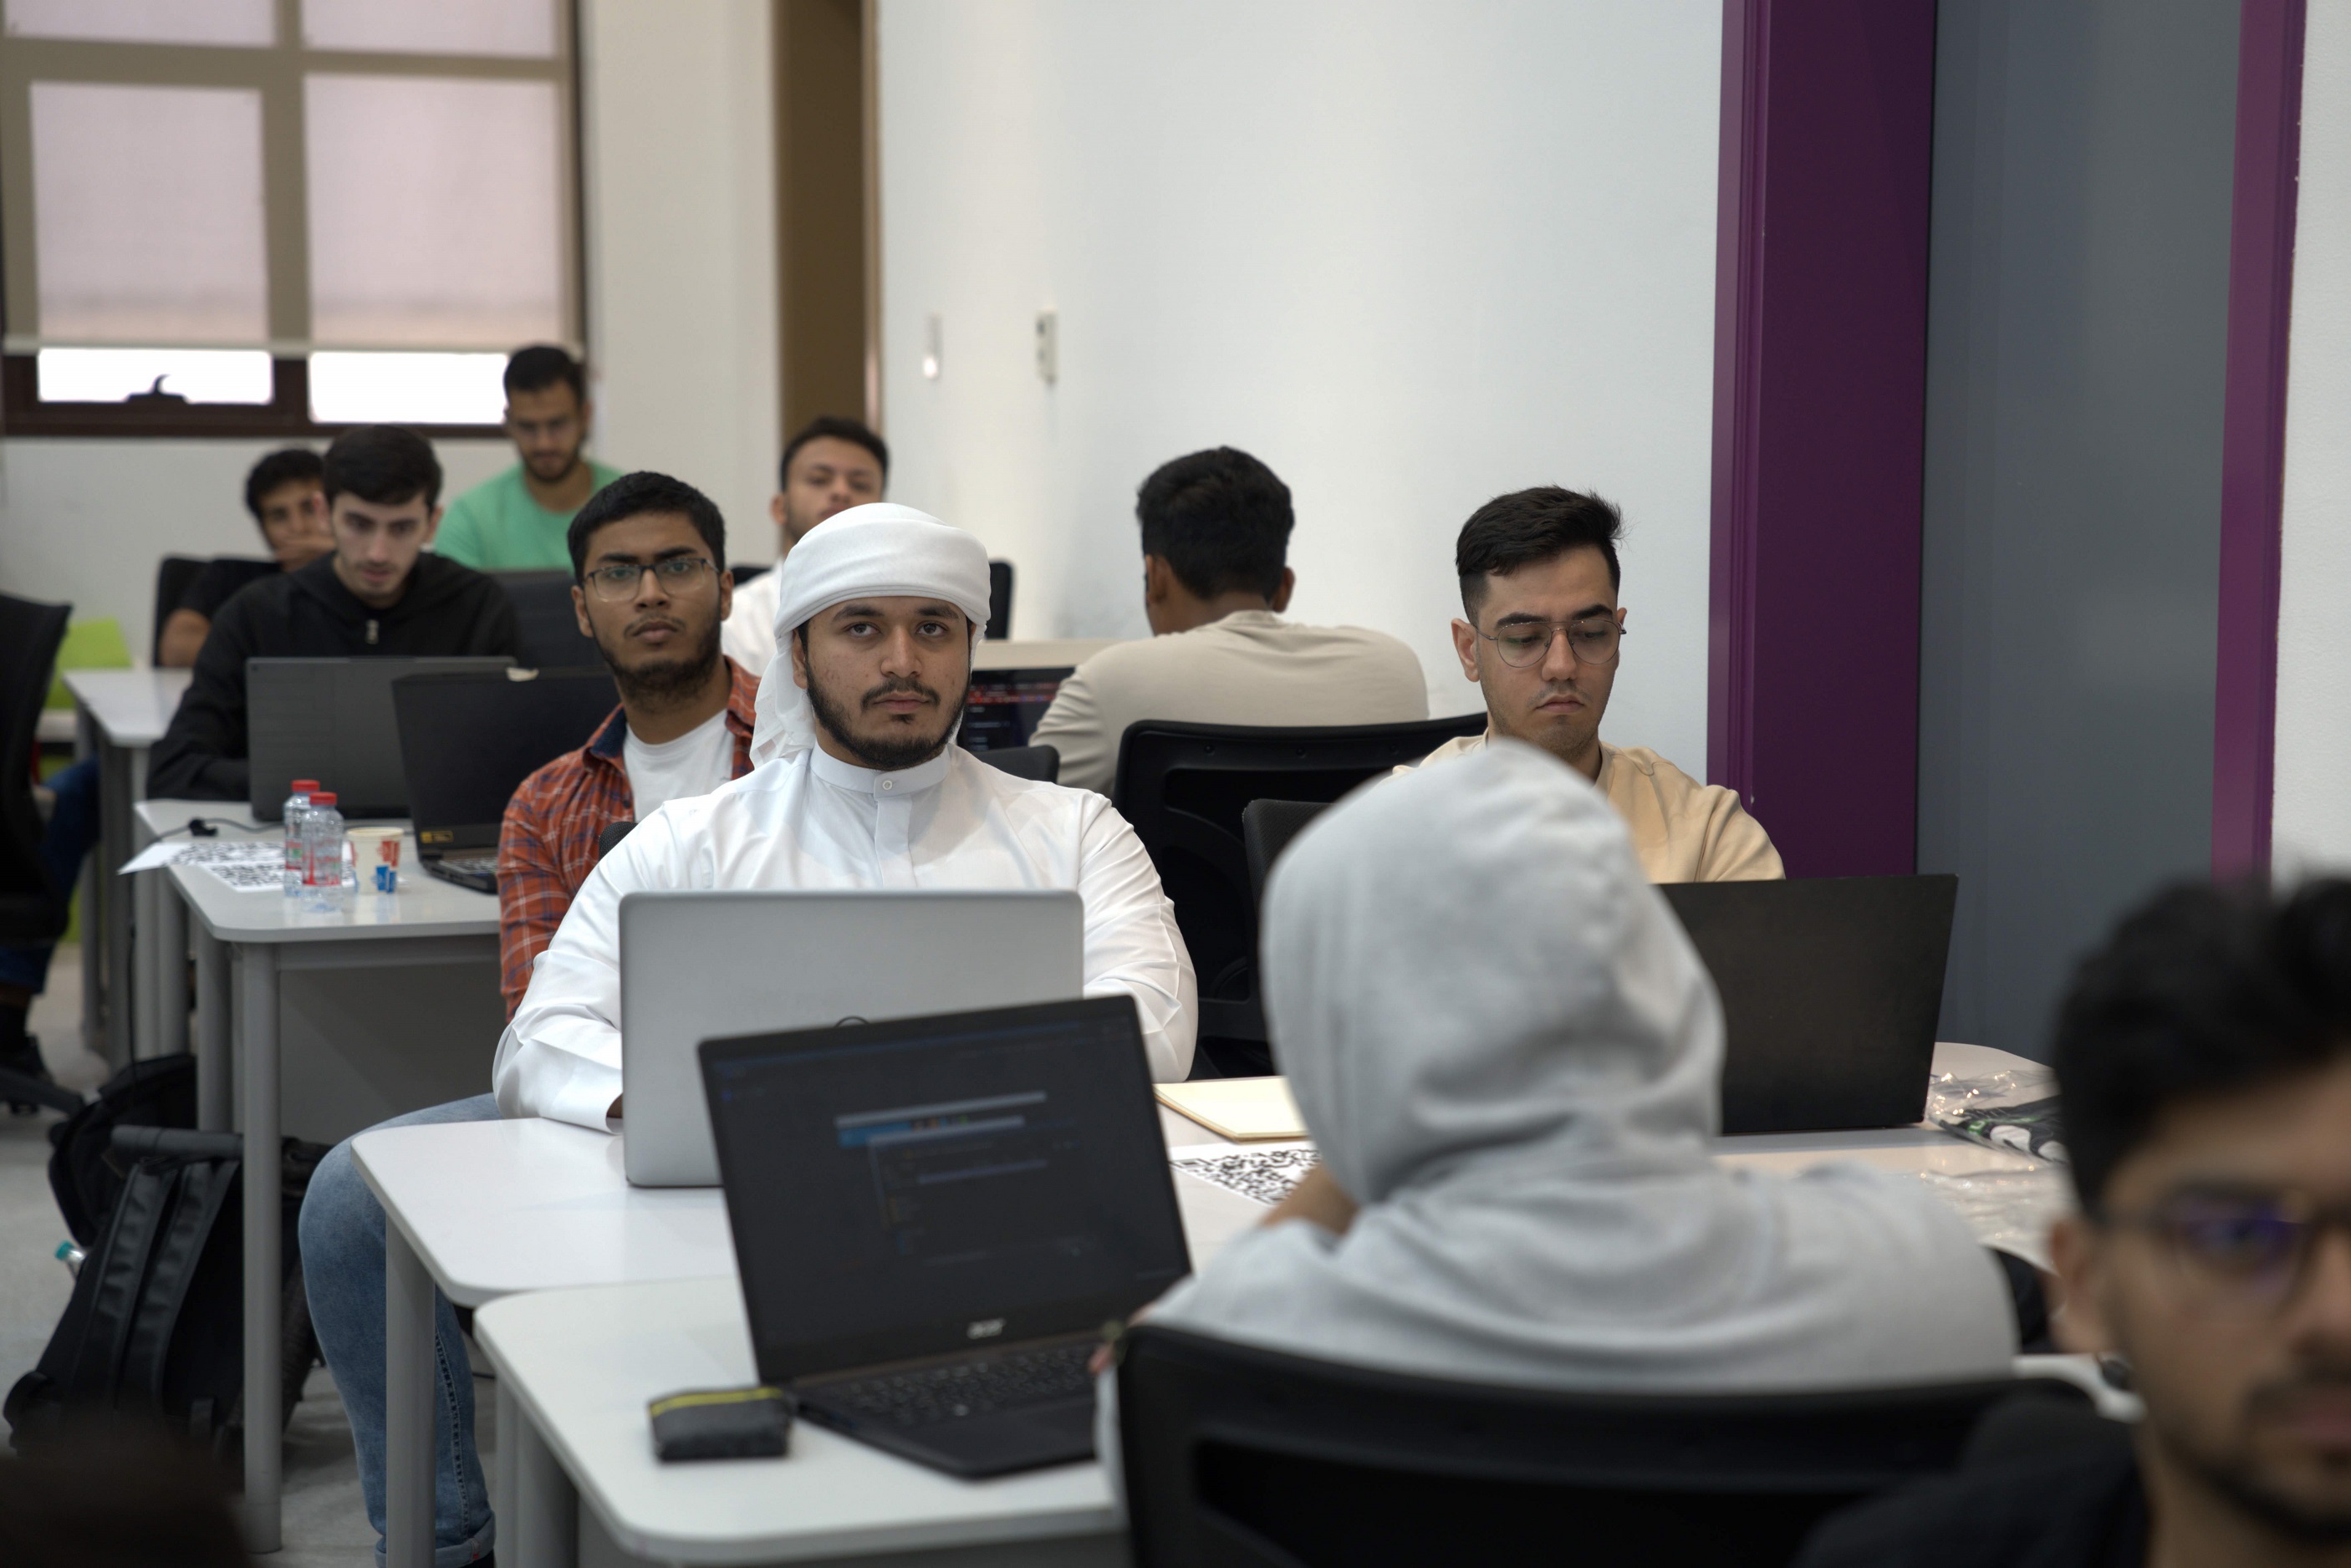 Abu Dhabi University Hosts Its First 5ire Web3 And Blockchain Hackathon To Advance Students ‘Future-Proof Knowledge